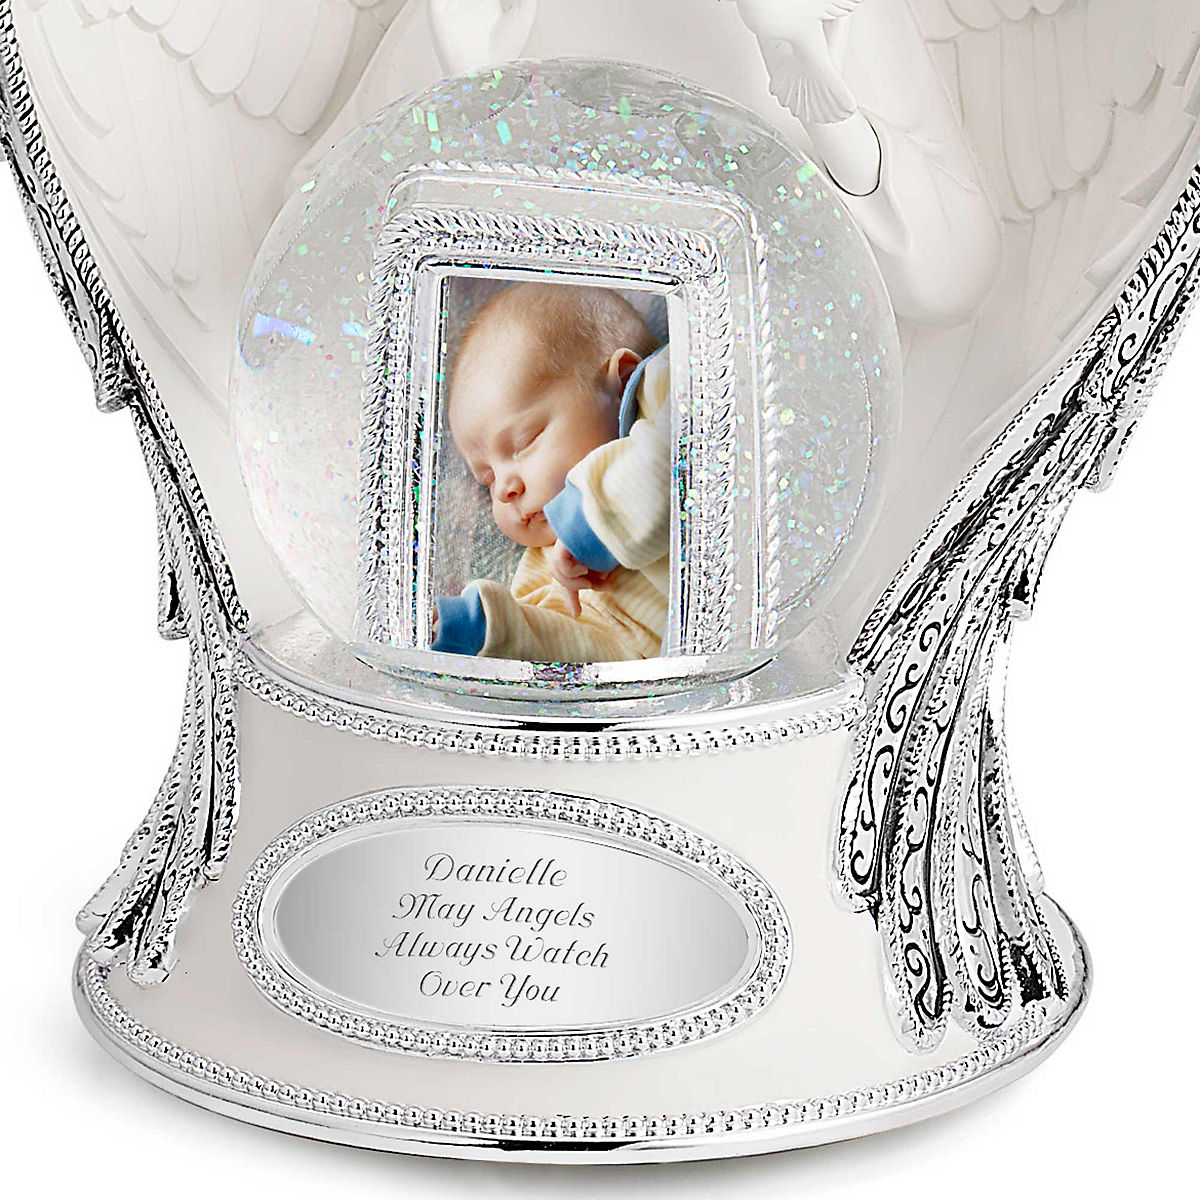 Upgraded Moon Child Singeek Sweet Dreams Guardian Angel Baby Musical Snow Globe with 32 Songs and Automatic Snowfall,100mm 6 Tall Souvenirs Collection